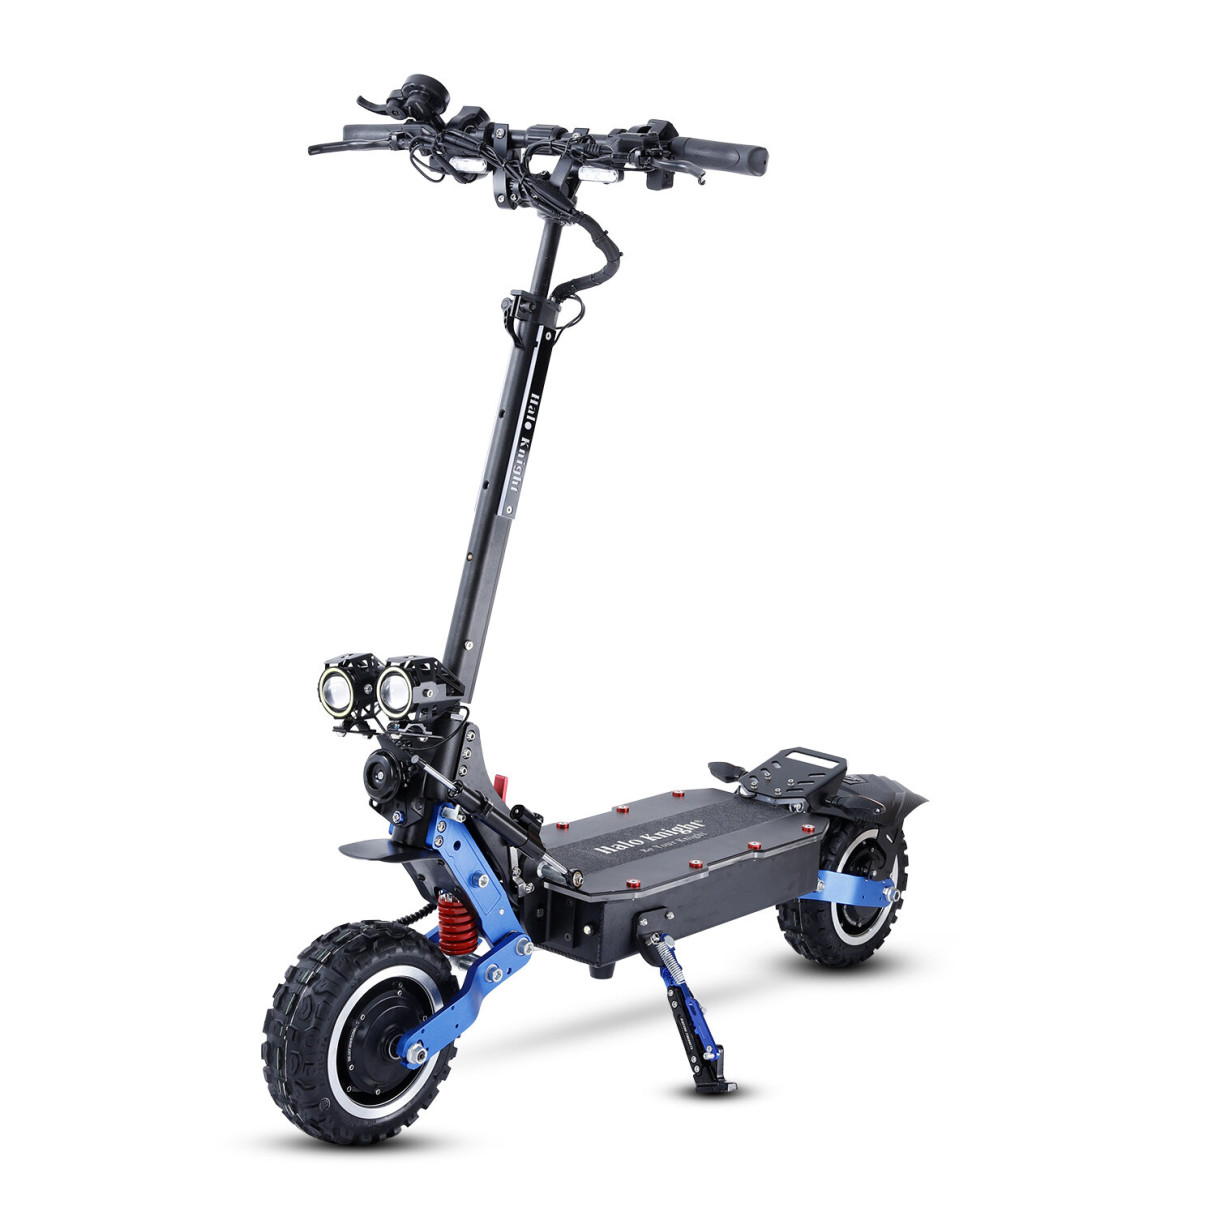 [EU DIRECT] Halo Knight T108 Pro Electric Scooter 60V 38.4Ah 6000W Dual Motor 11inch Foldable Electric Scooter 80km Mileage 200kg Max Load EU Plug